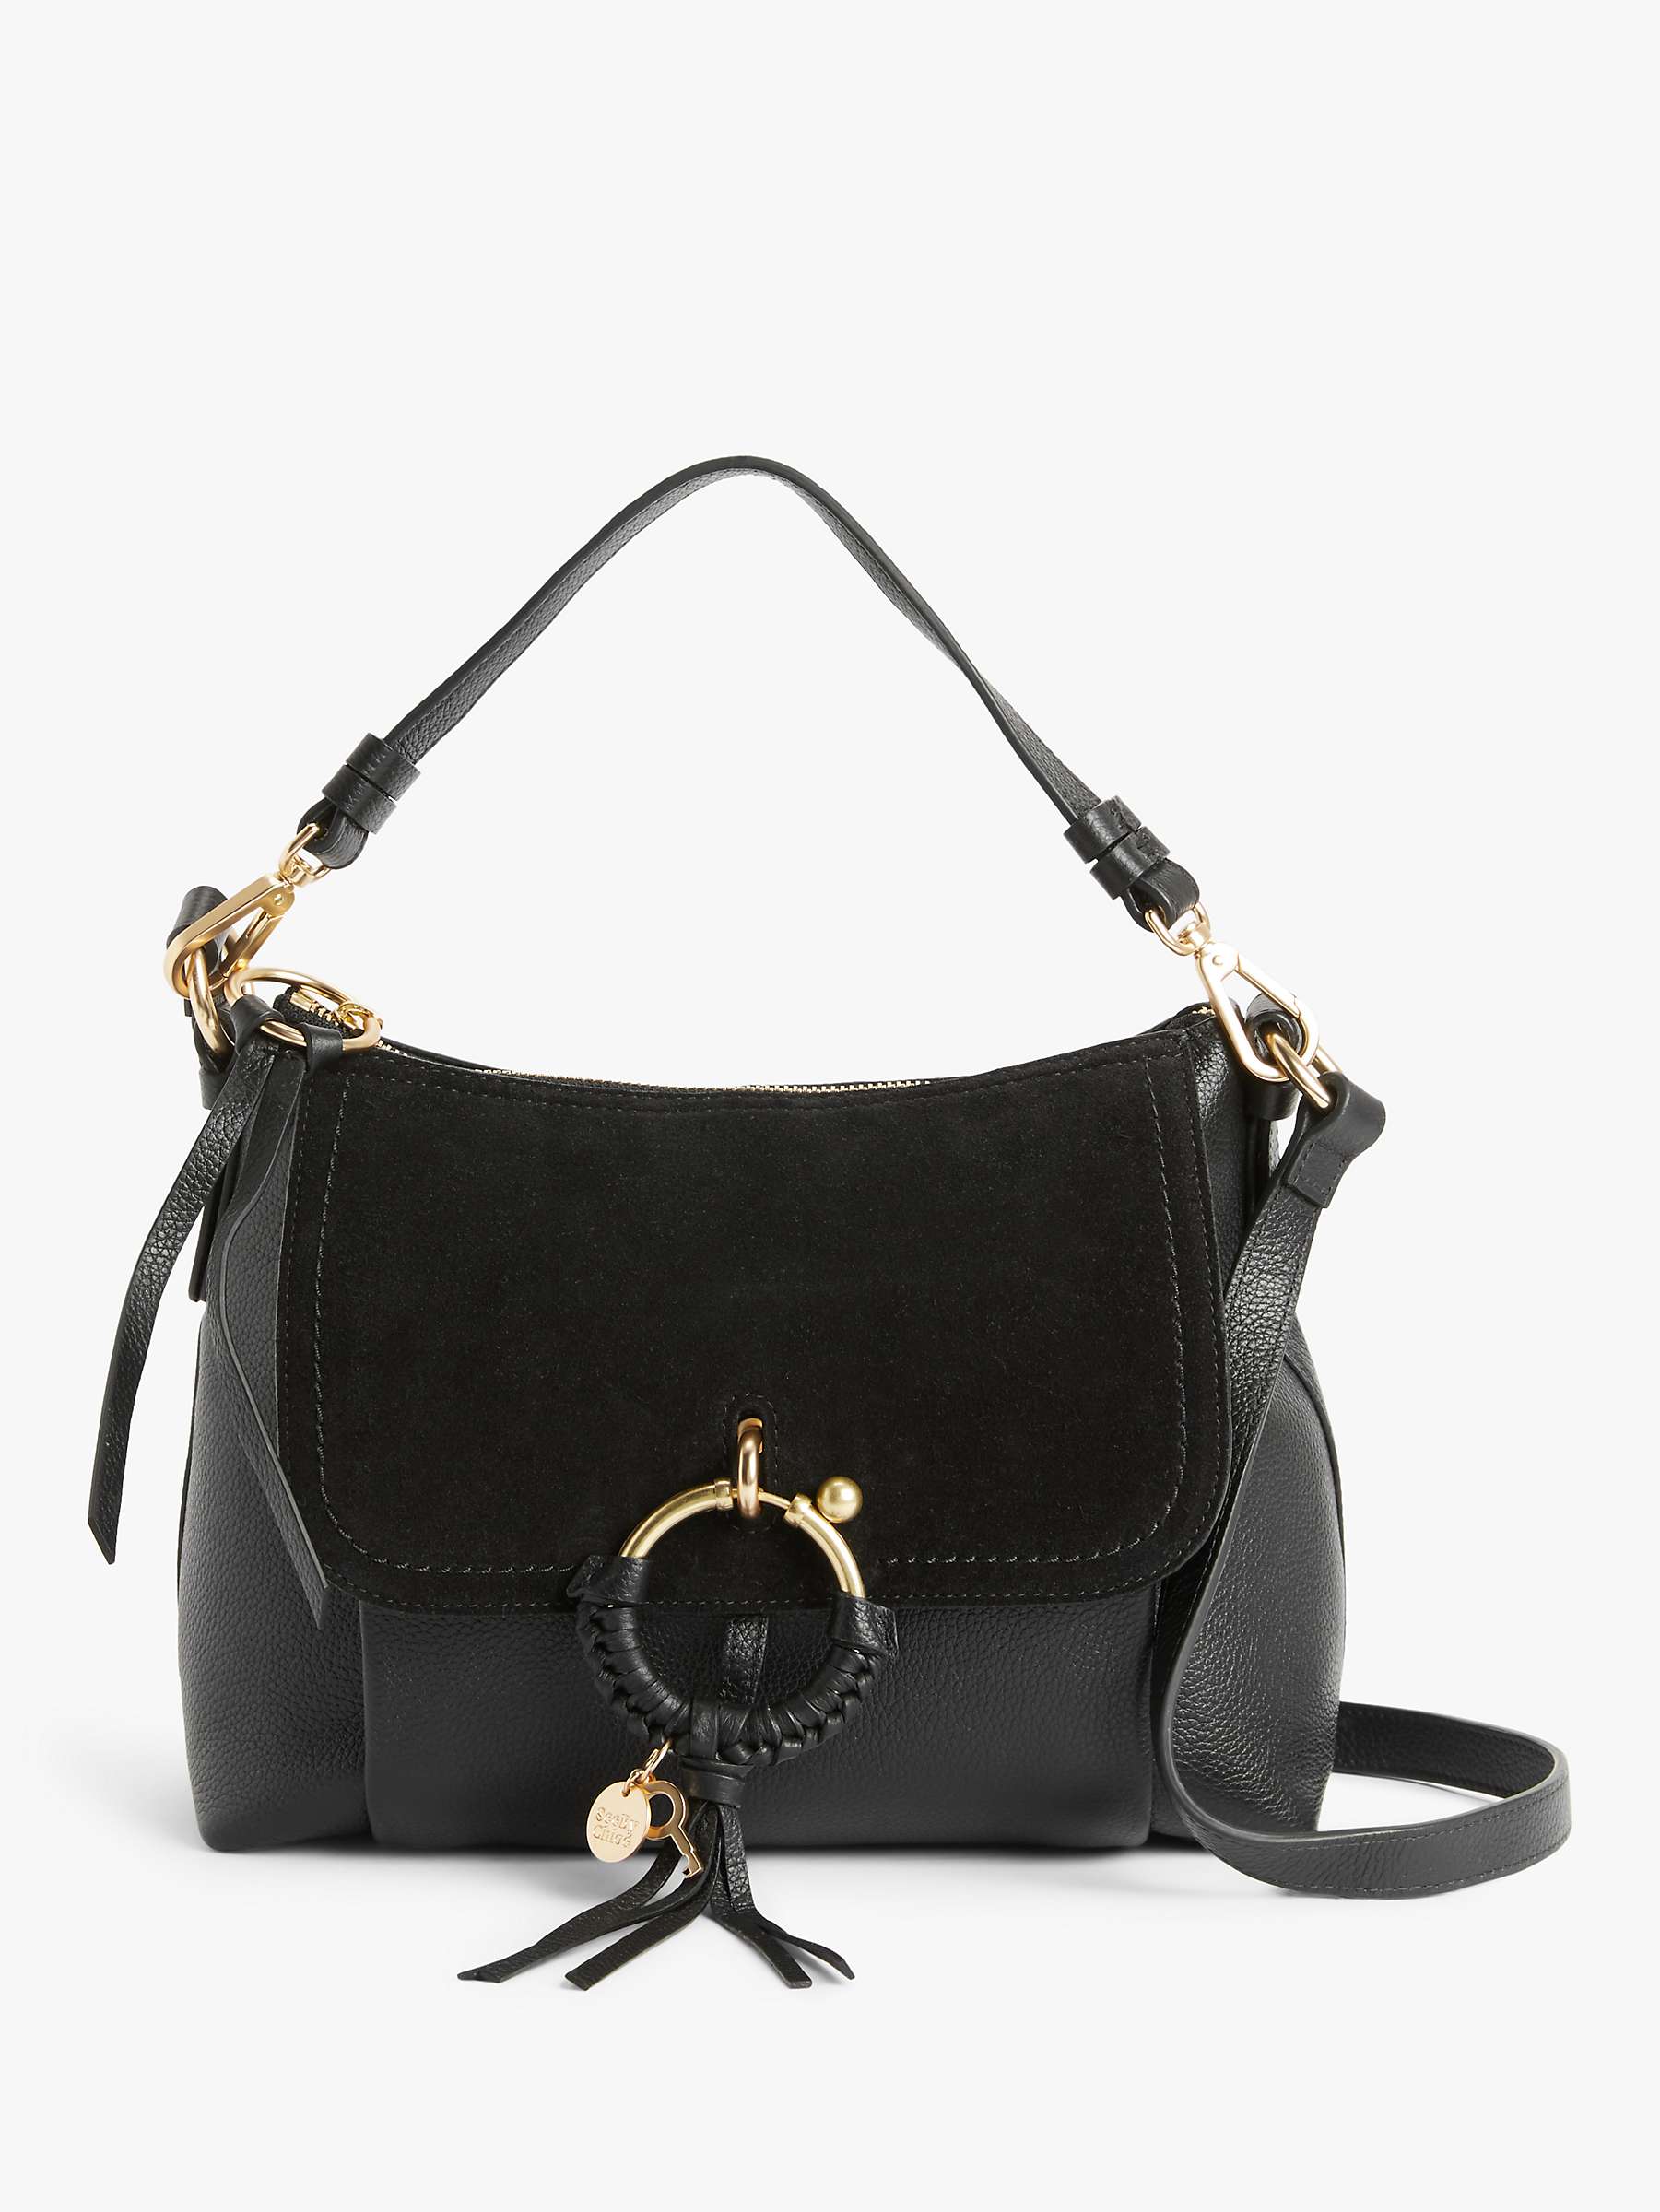 See By Chloé Joan Suede Leather Small Satchel Bag, Black at John Lewis   Partners